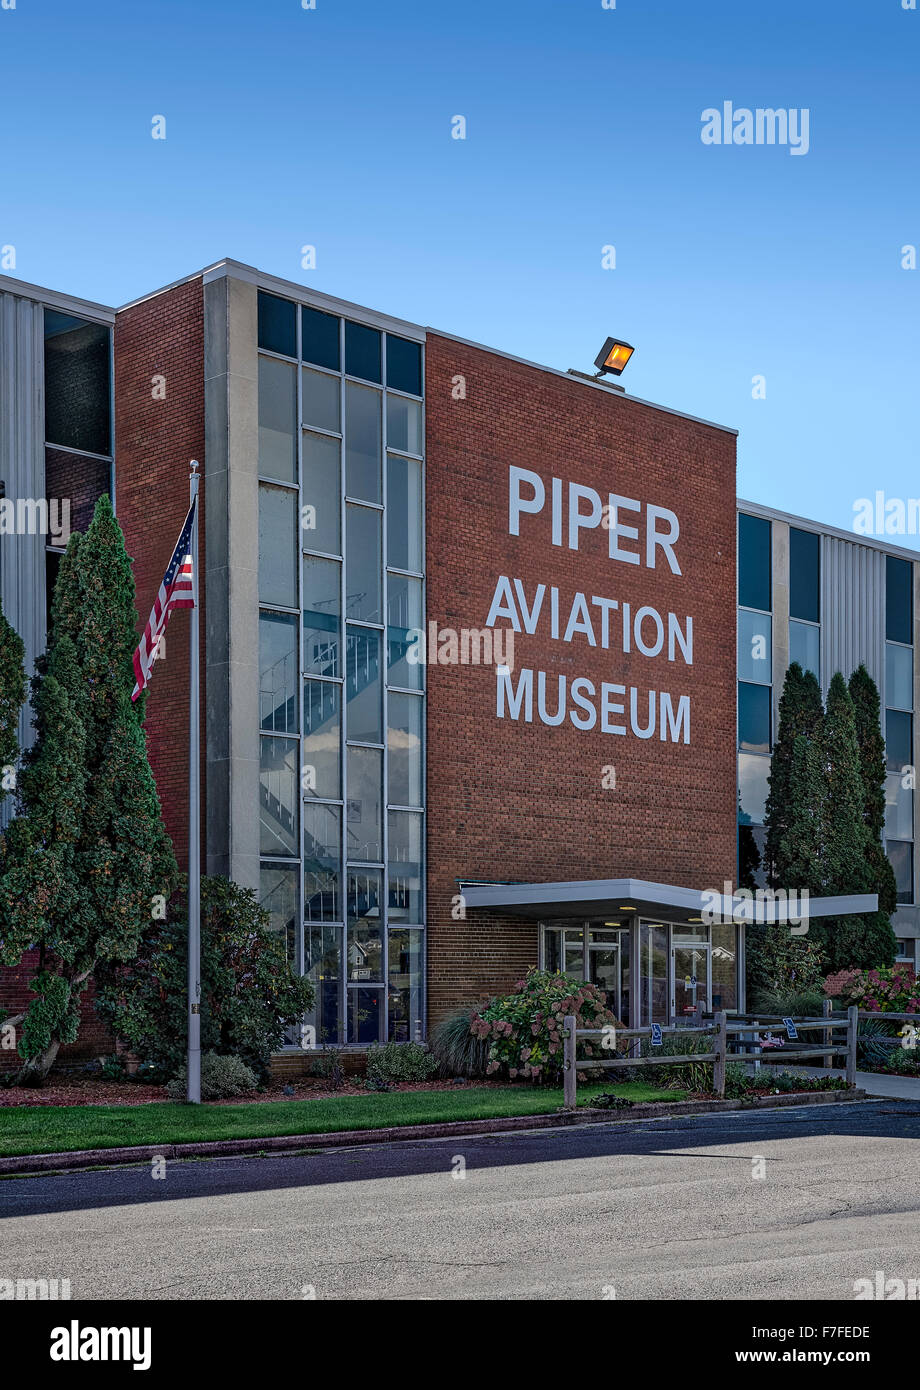 Piper Aviation Museum, Lock Haven, Pennsylvanie, USA Banque D'Images